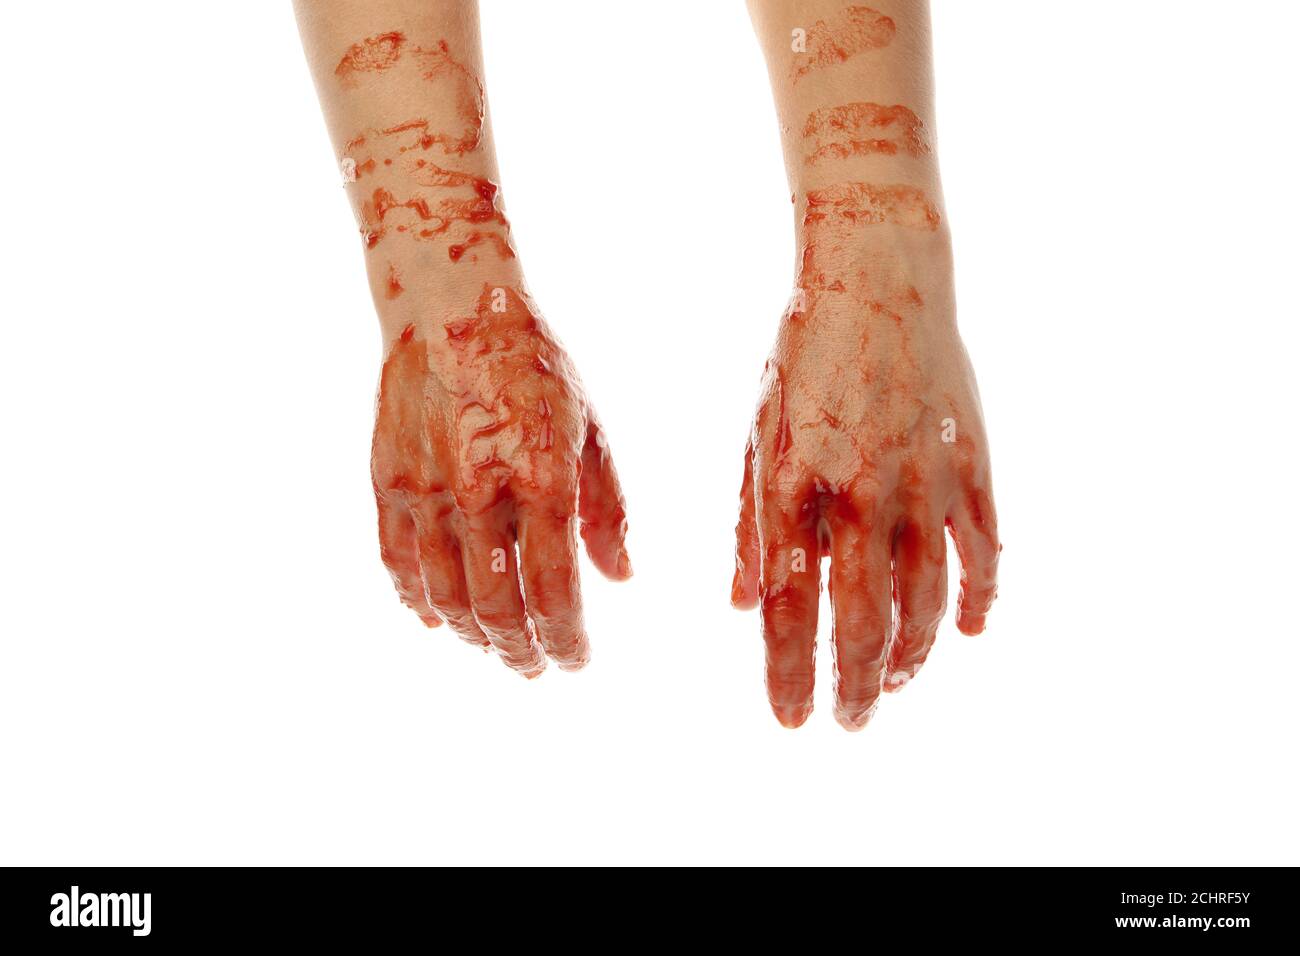 Blood zombie hands isolated on white background Stock Photo